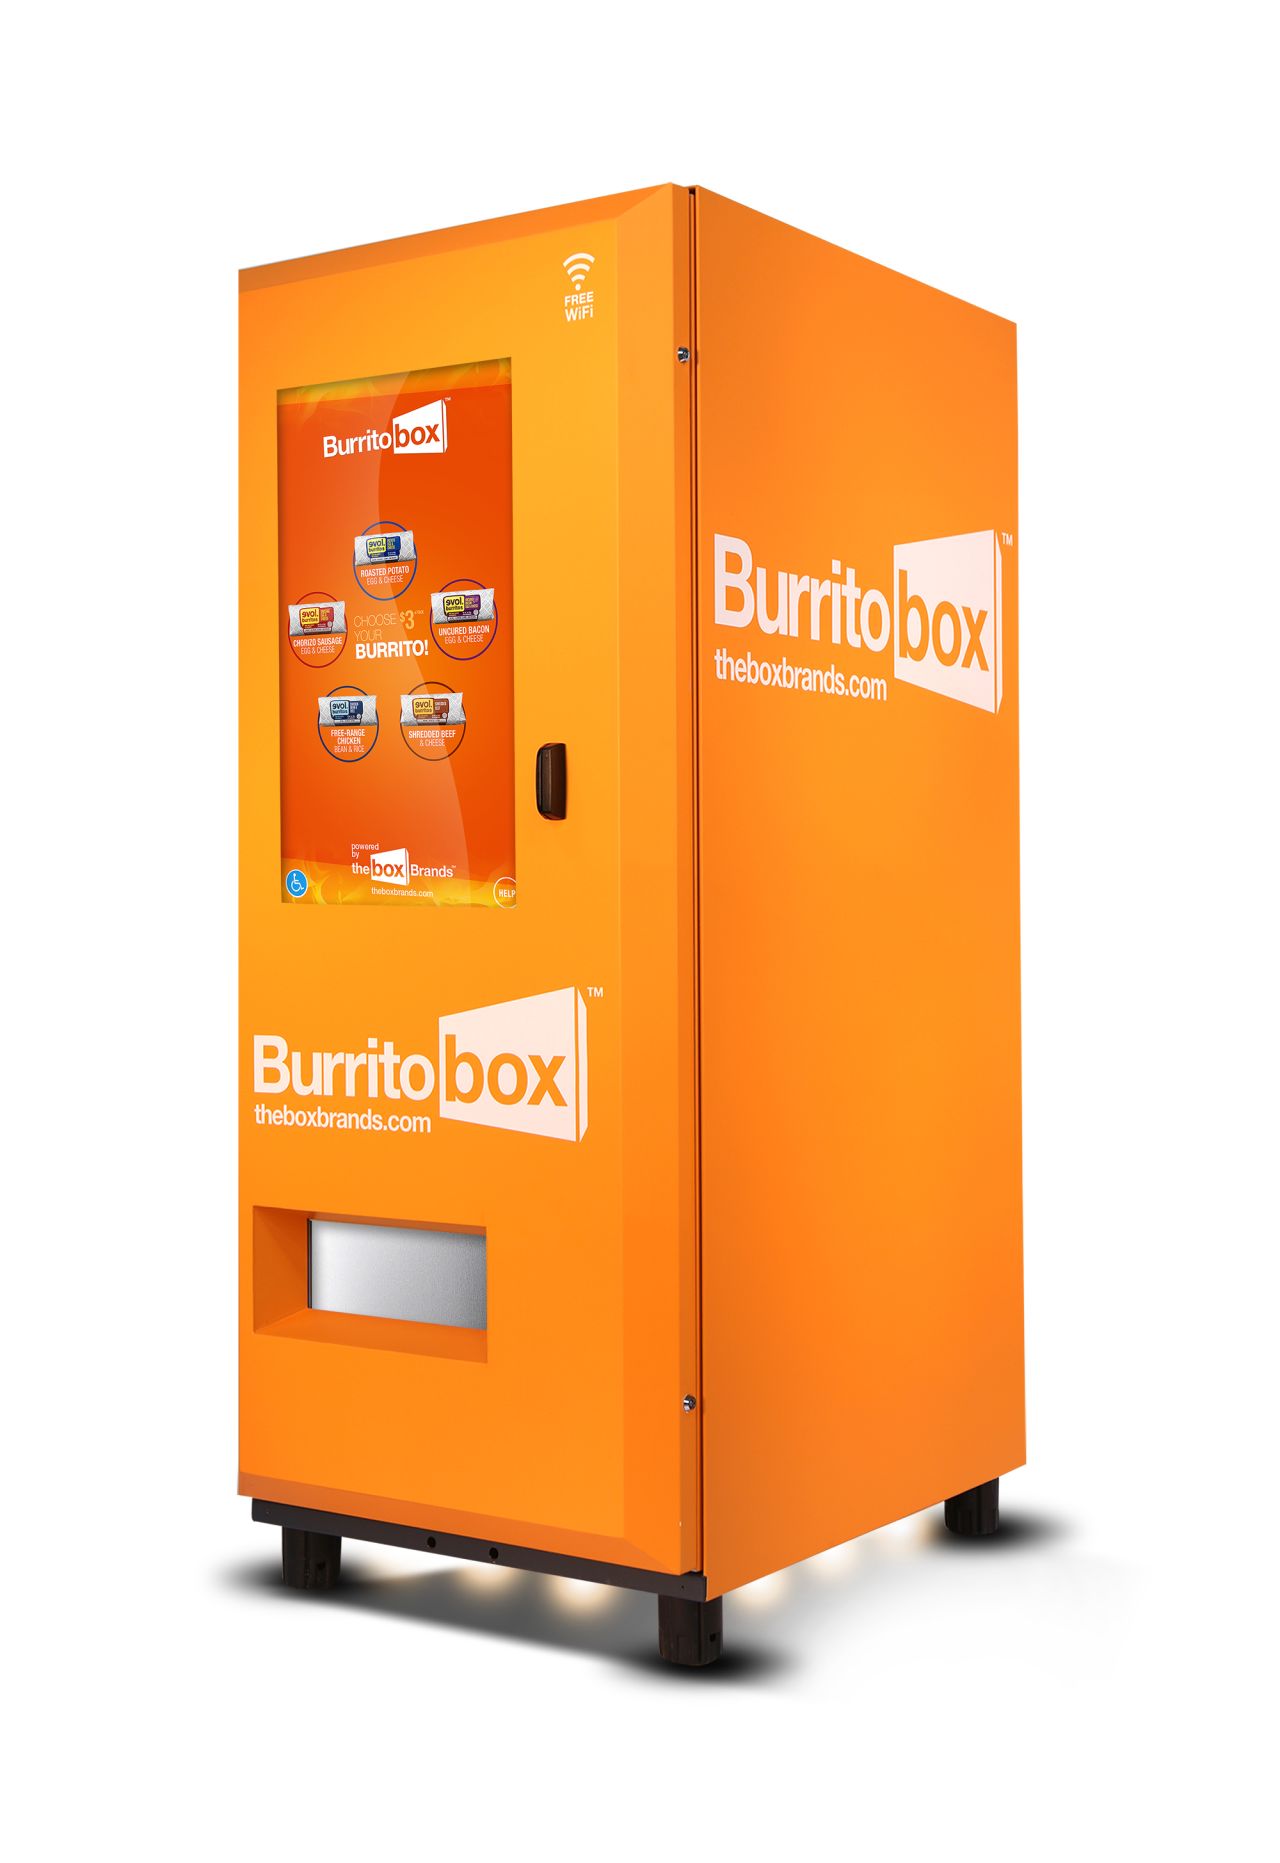 Where better than the University of Southern California campus to find the first-ever burrito vending machine? 